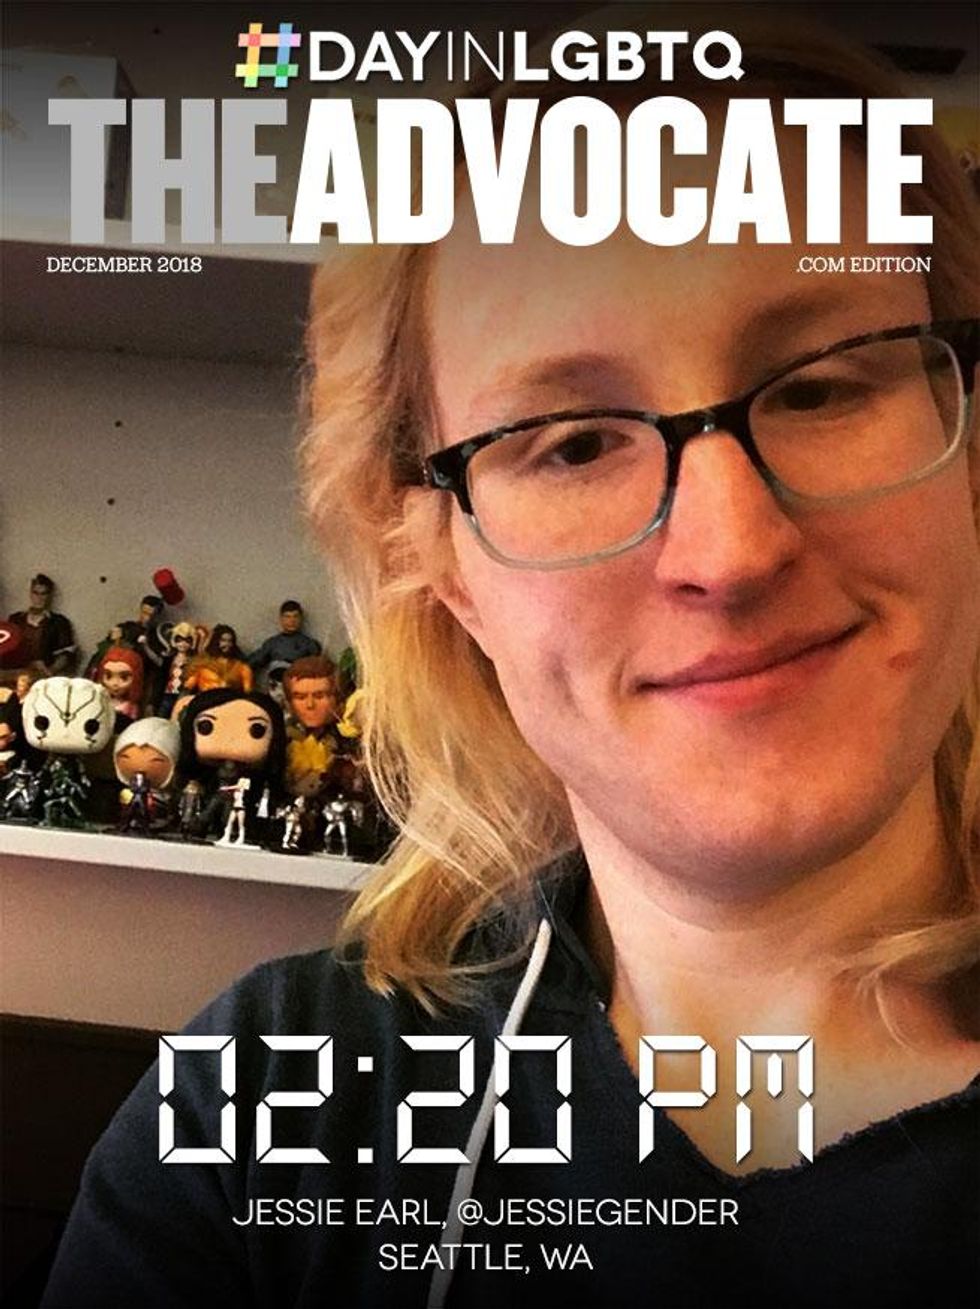 Pm-02-20-jessie-theadvocate-2018-dayinlgbt-cover-template-655